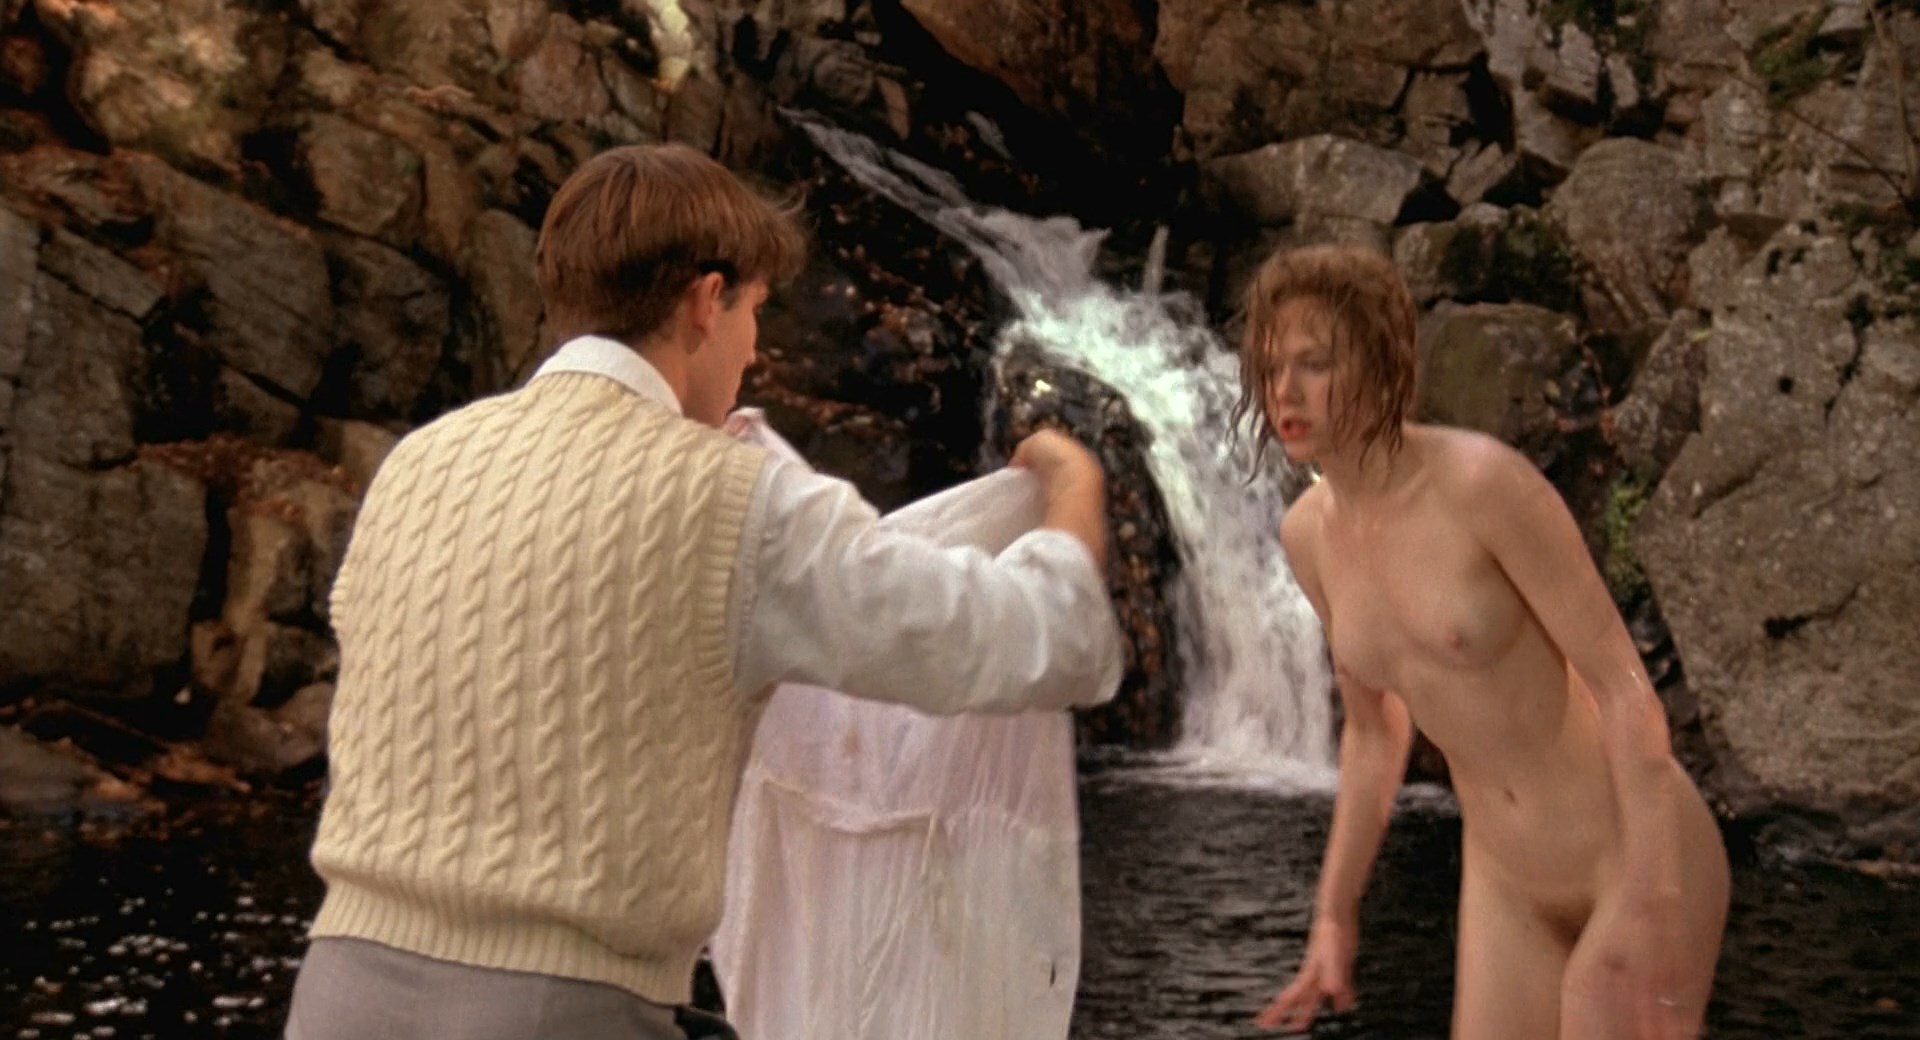 Fully naked Nicole Kidman walks from the water and puts a shirt on.